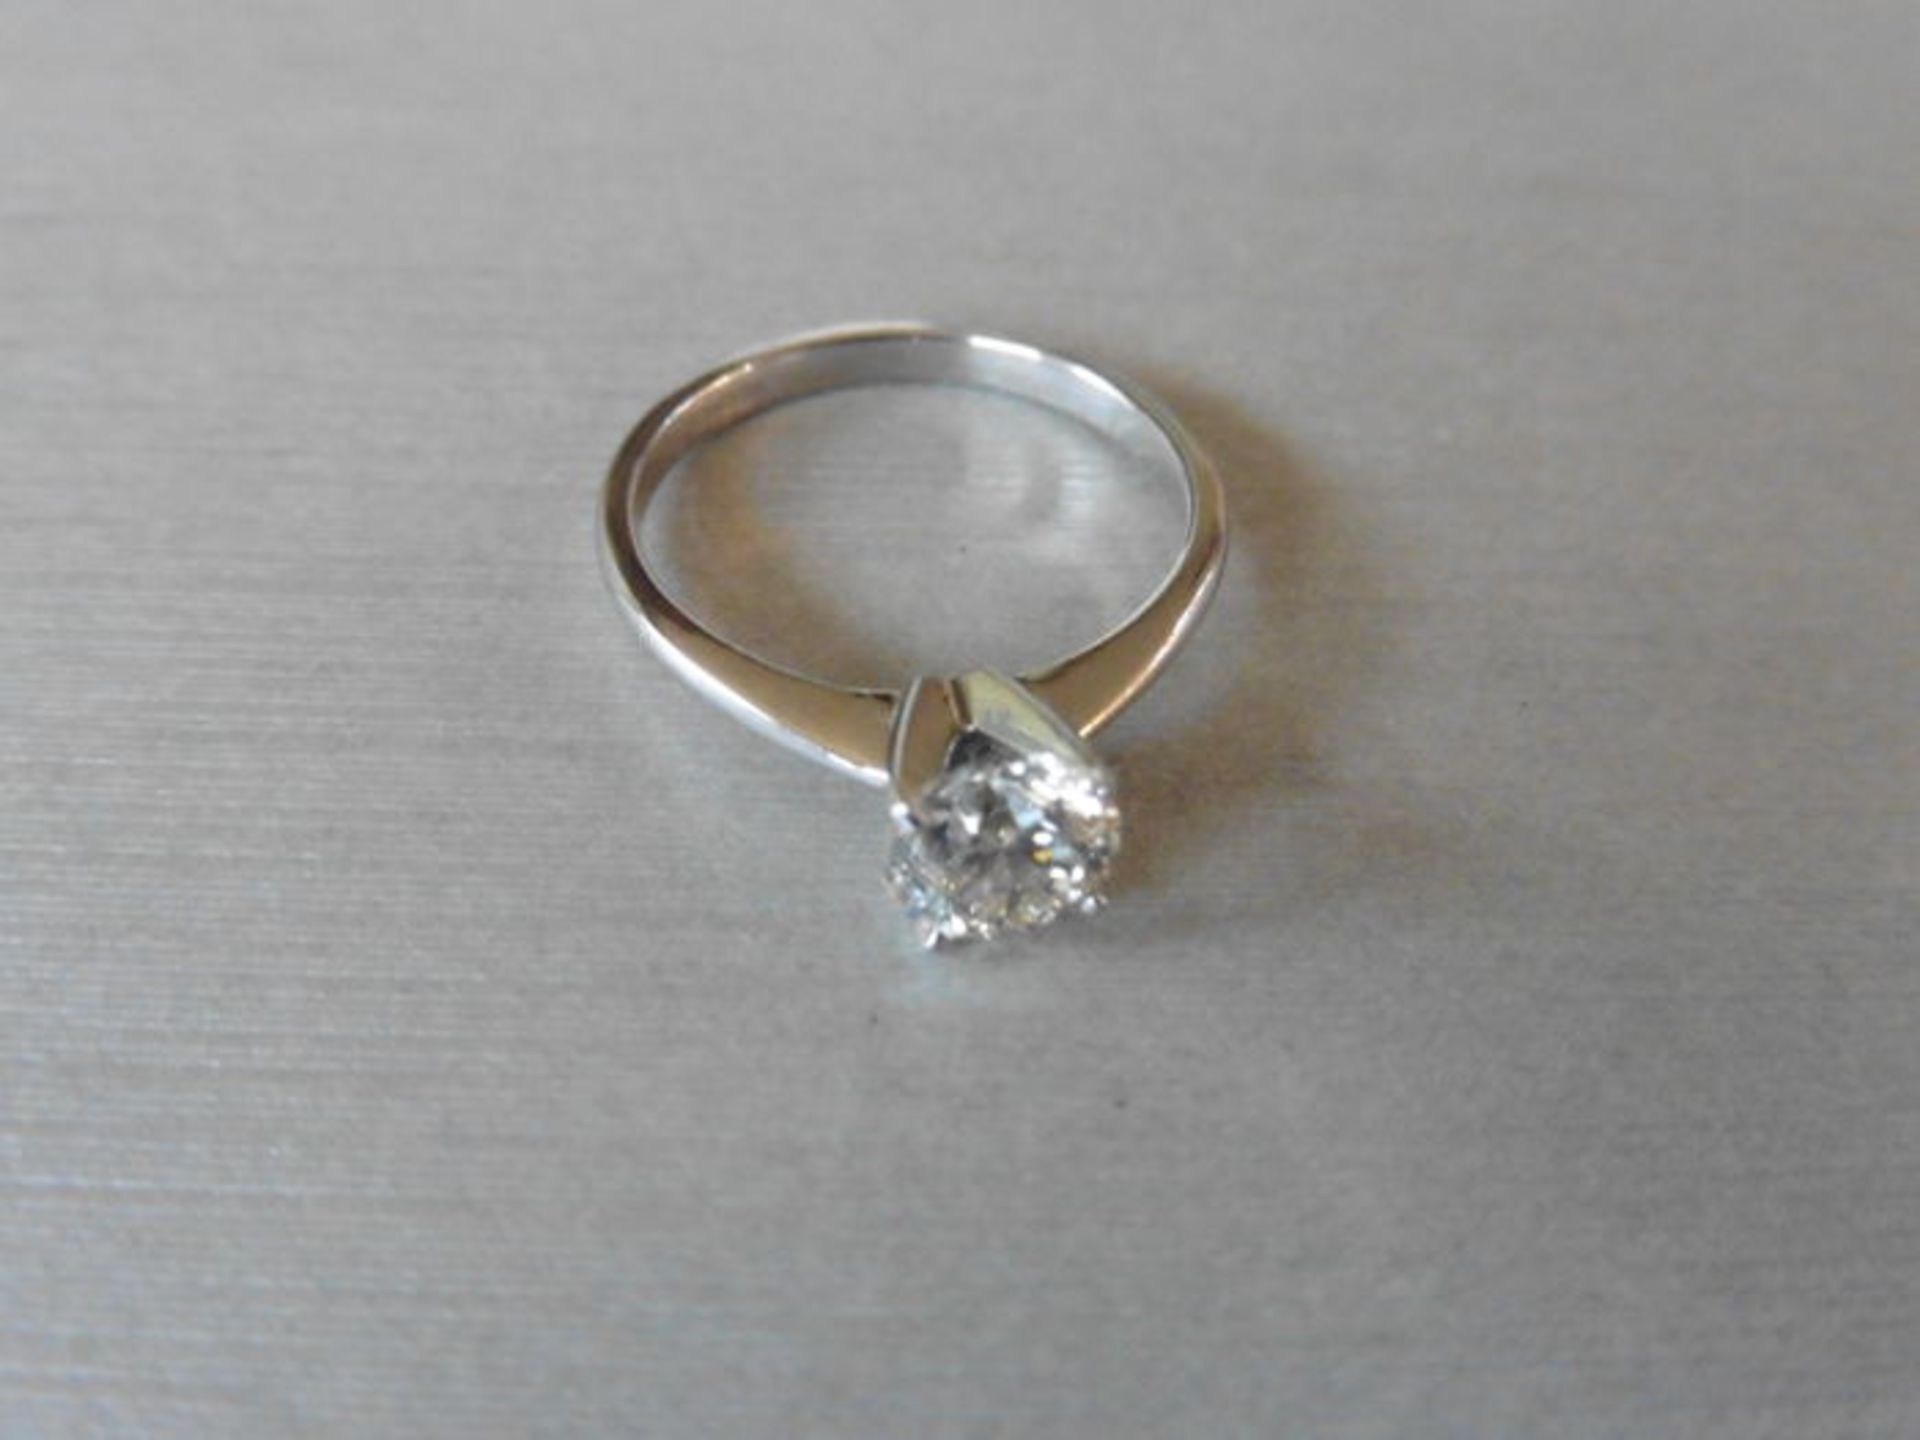 1.00ct diamond solitaire ring set in platinum. H colour and I1 clarity. 4 claw setting, size M. - Image 2 of 3